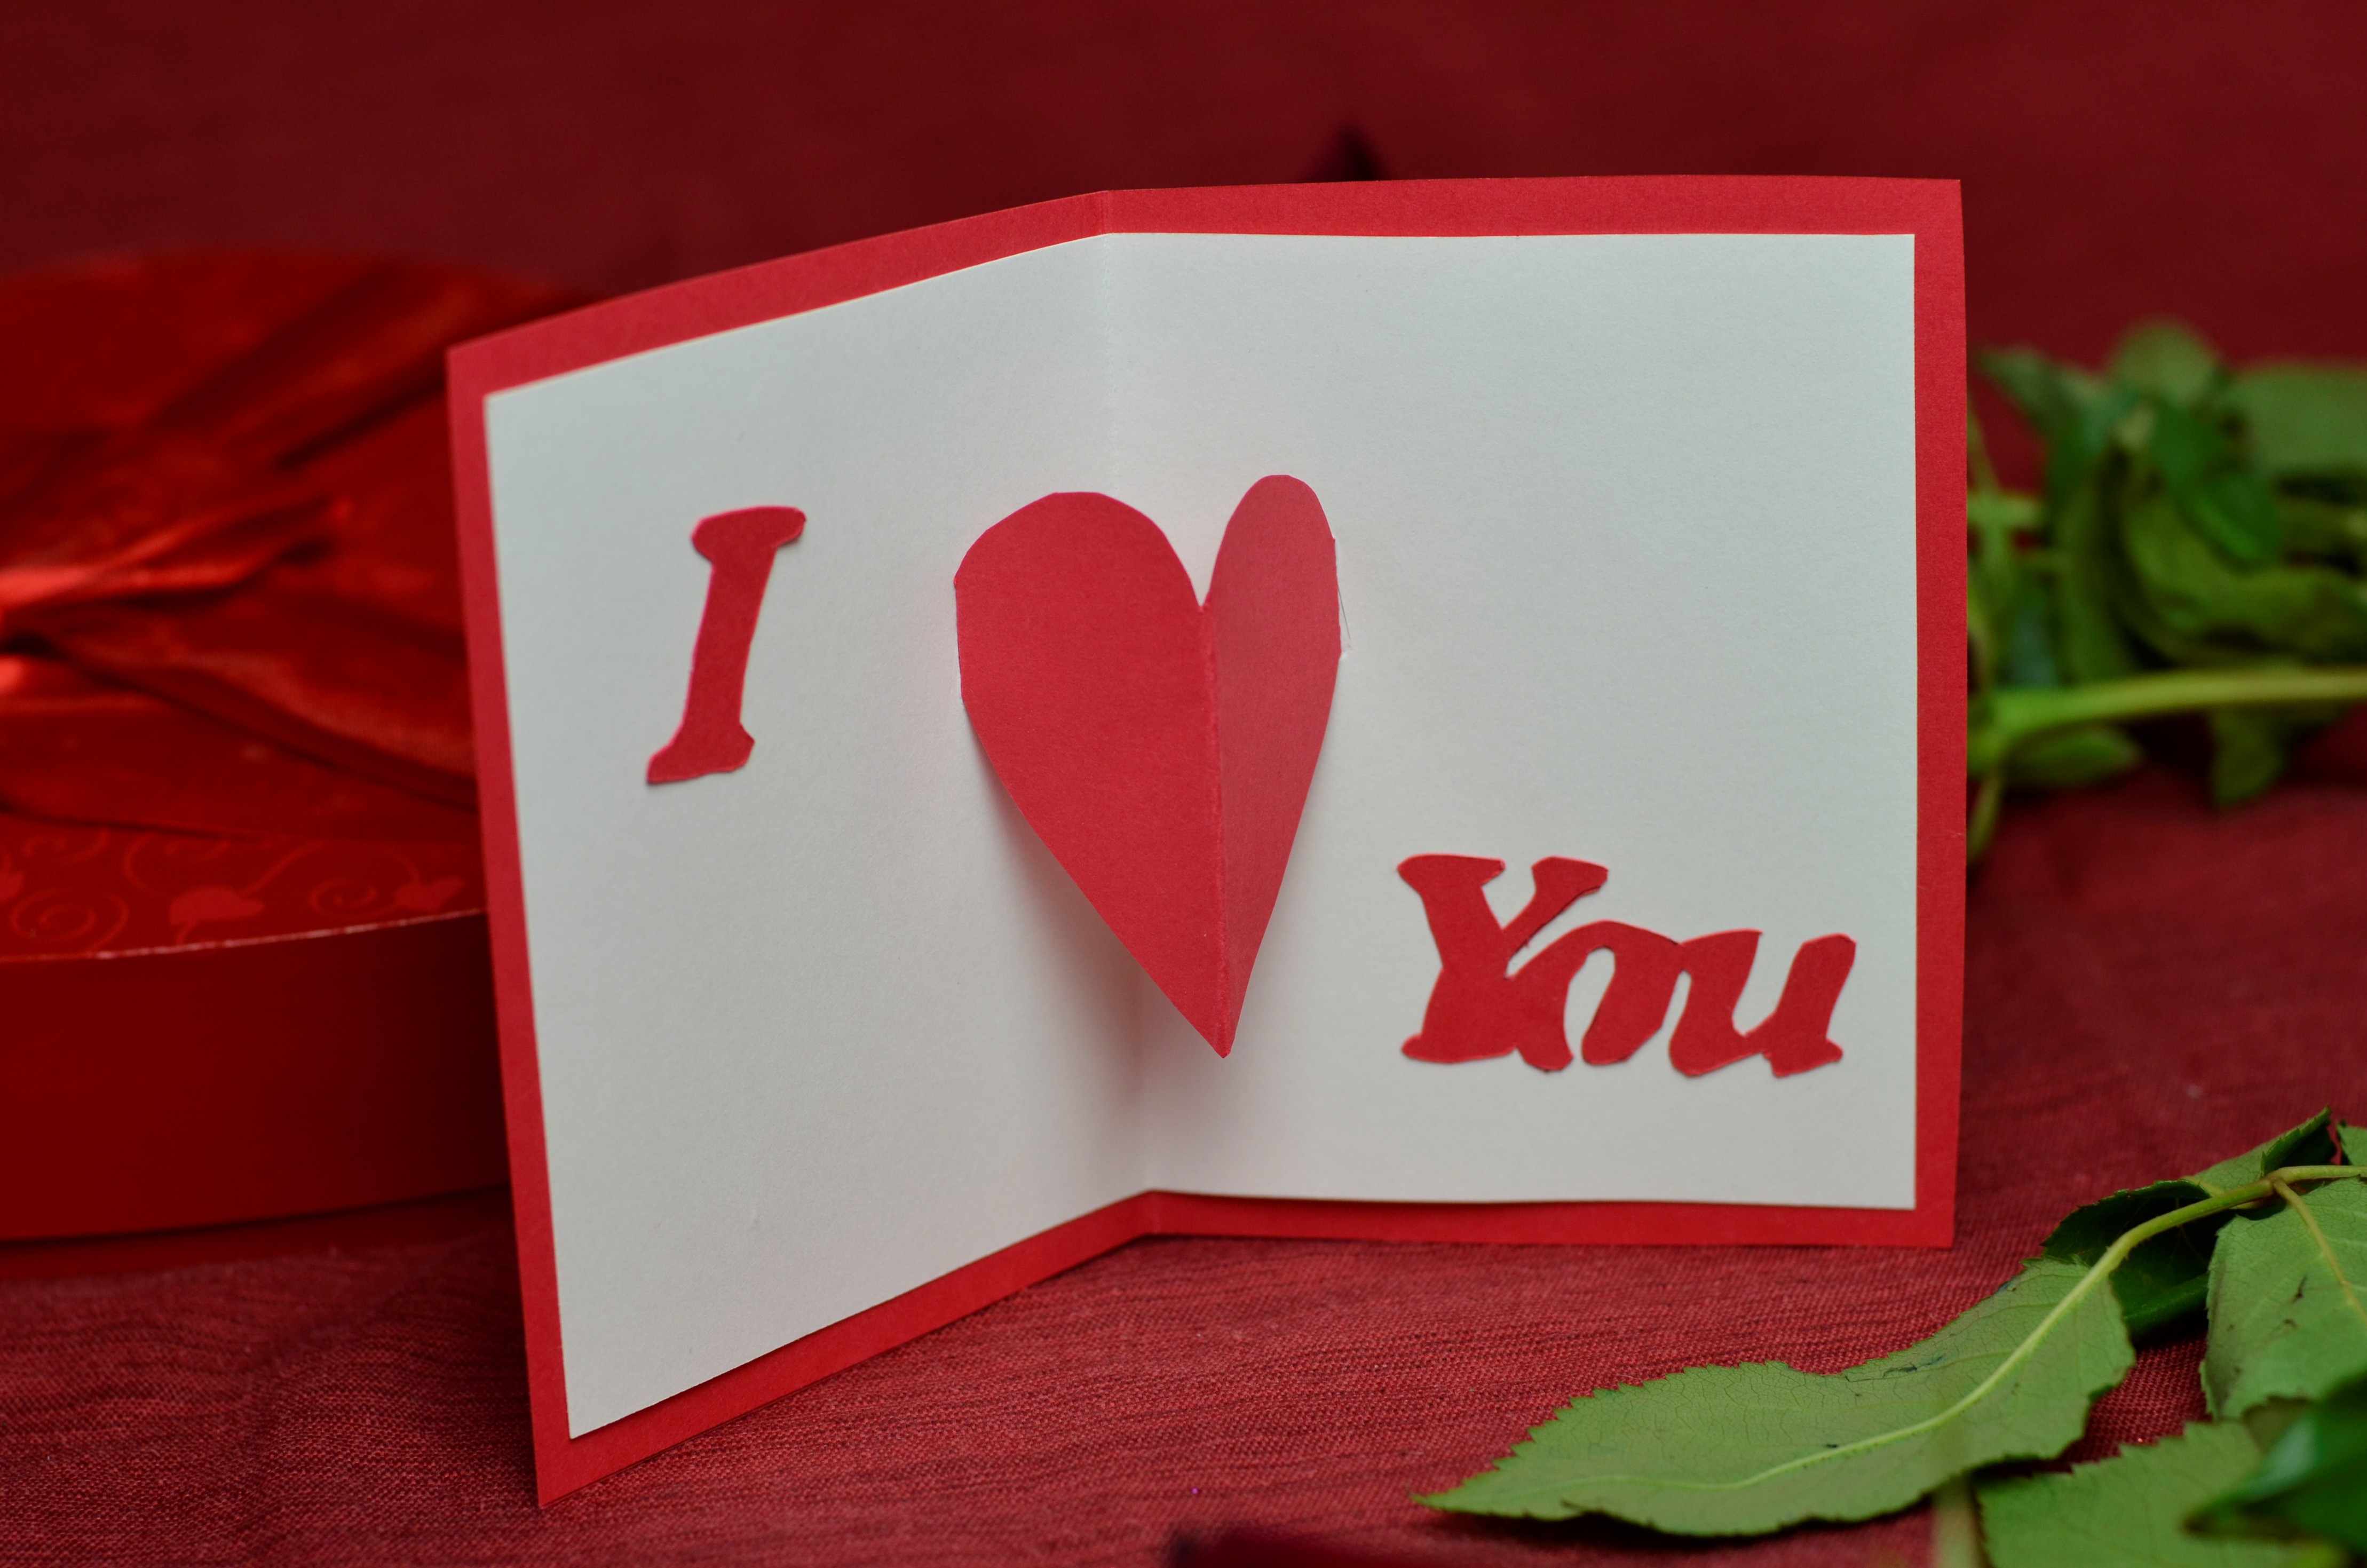 Top 10 Ideas for Valentine's Day Cards - Creative Pop Up Cards
